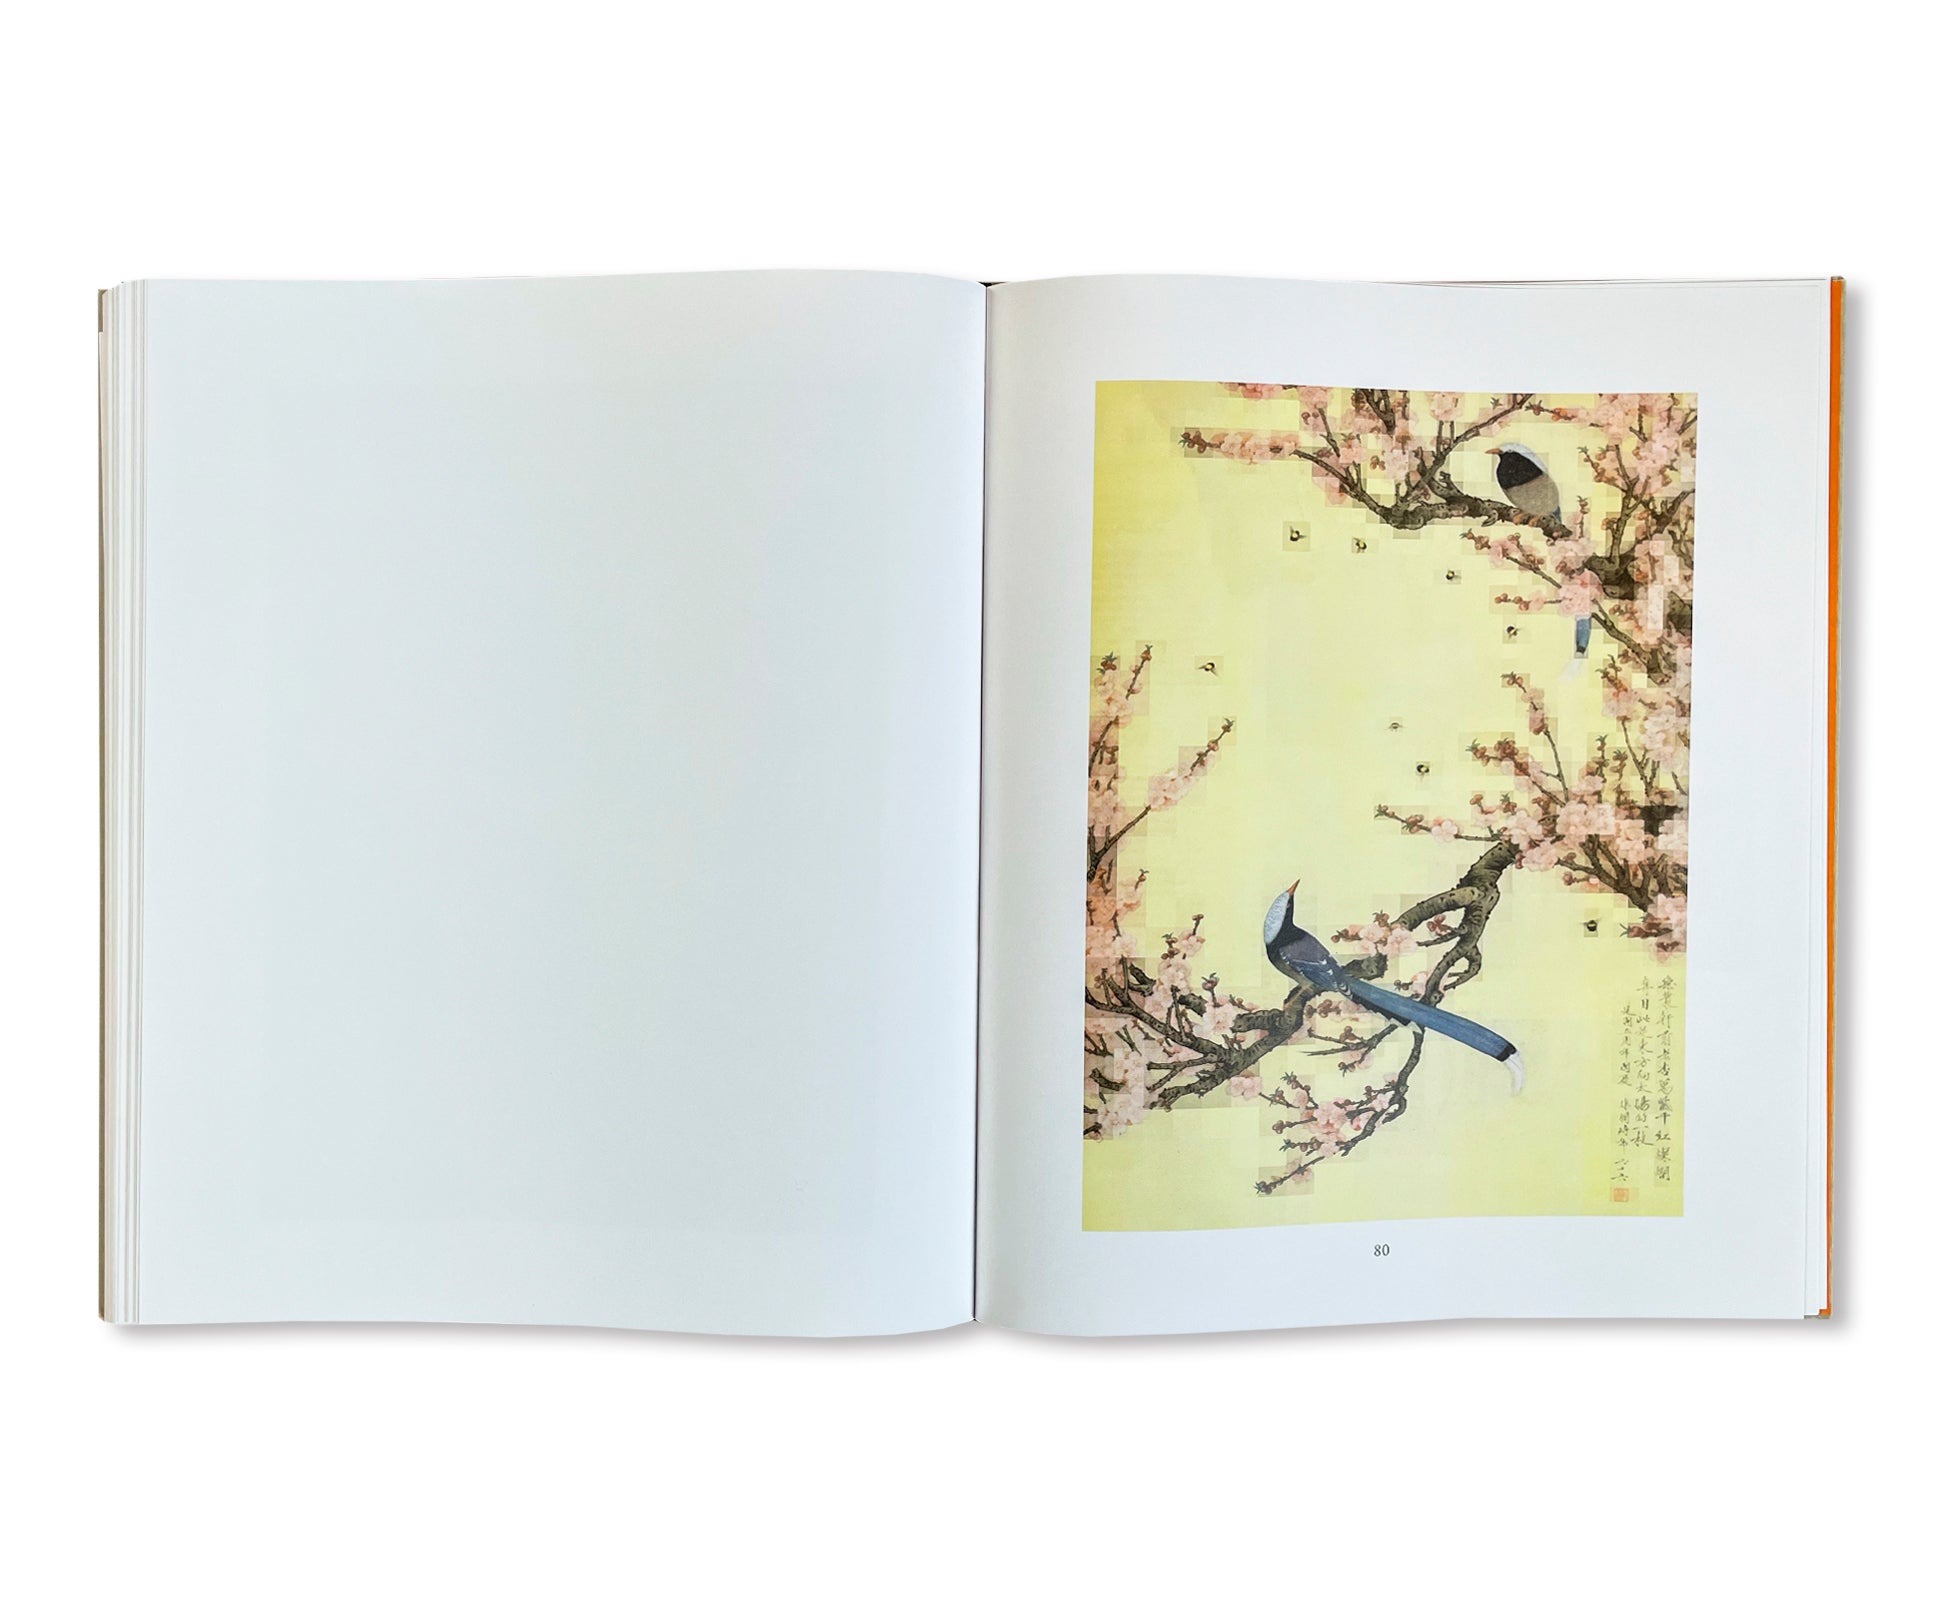 TABLEAUX CHINOIS by Thomas Ruff [SPECIAL EDITION (SEEROSE)]